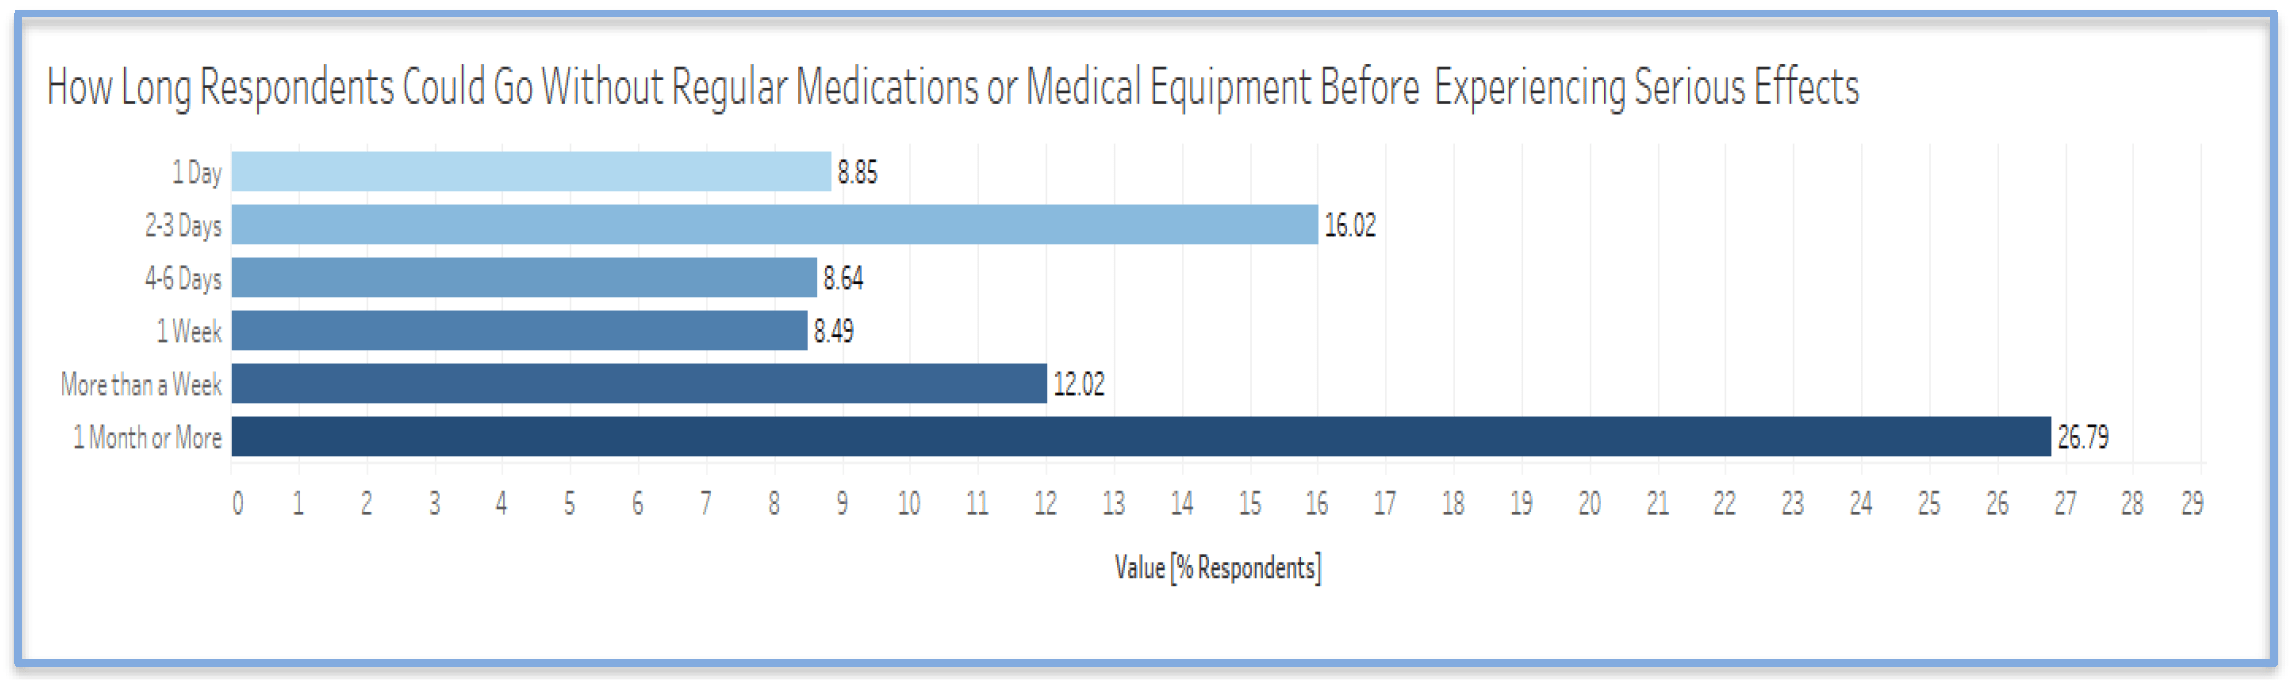 How long respondents could go without regular medications or medical equipment before experiencing serious effects